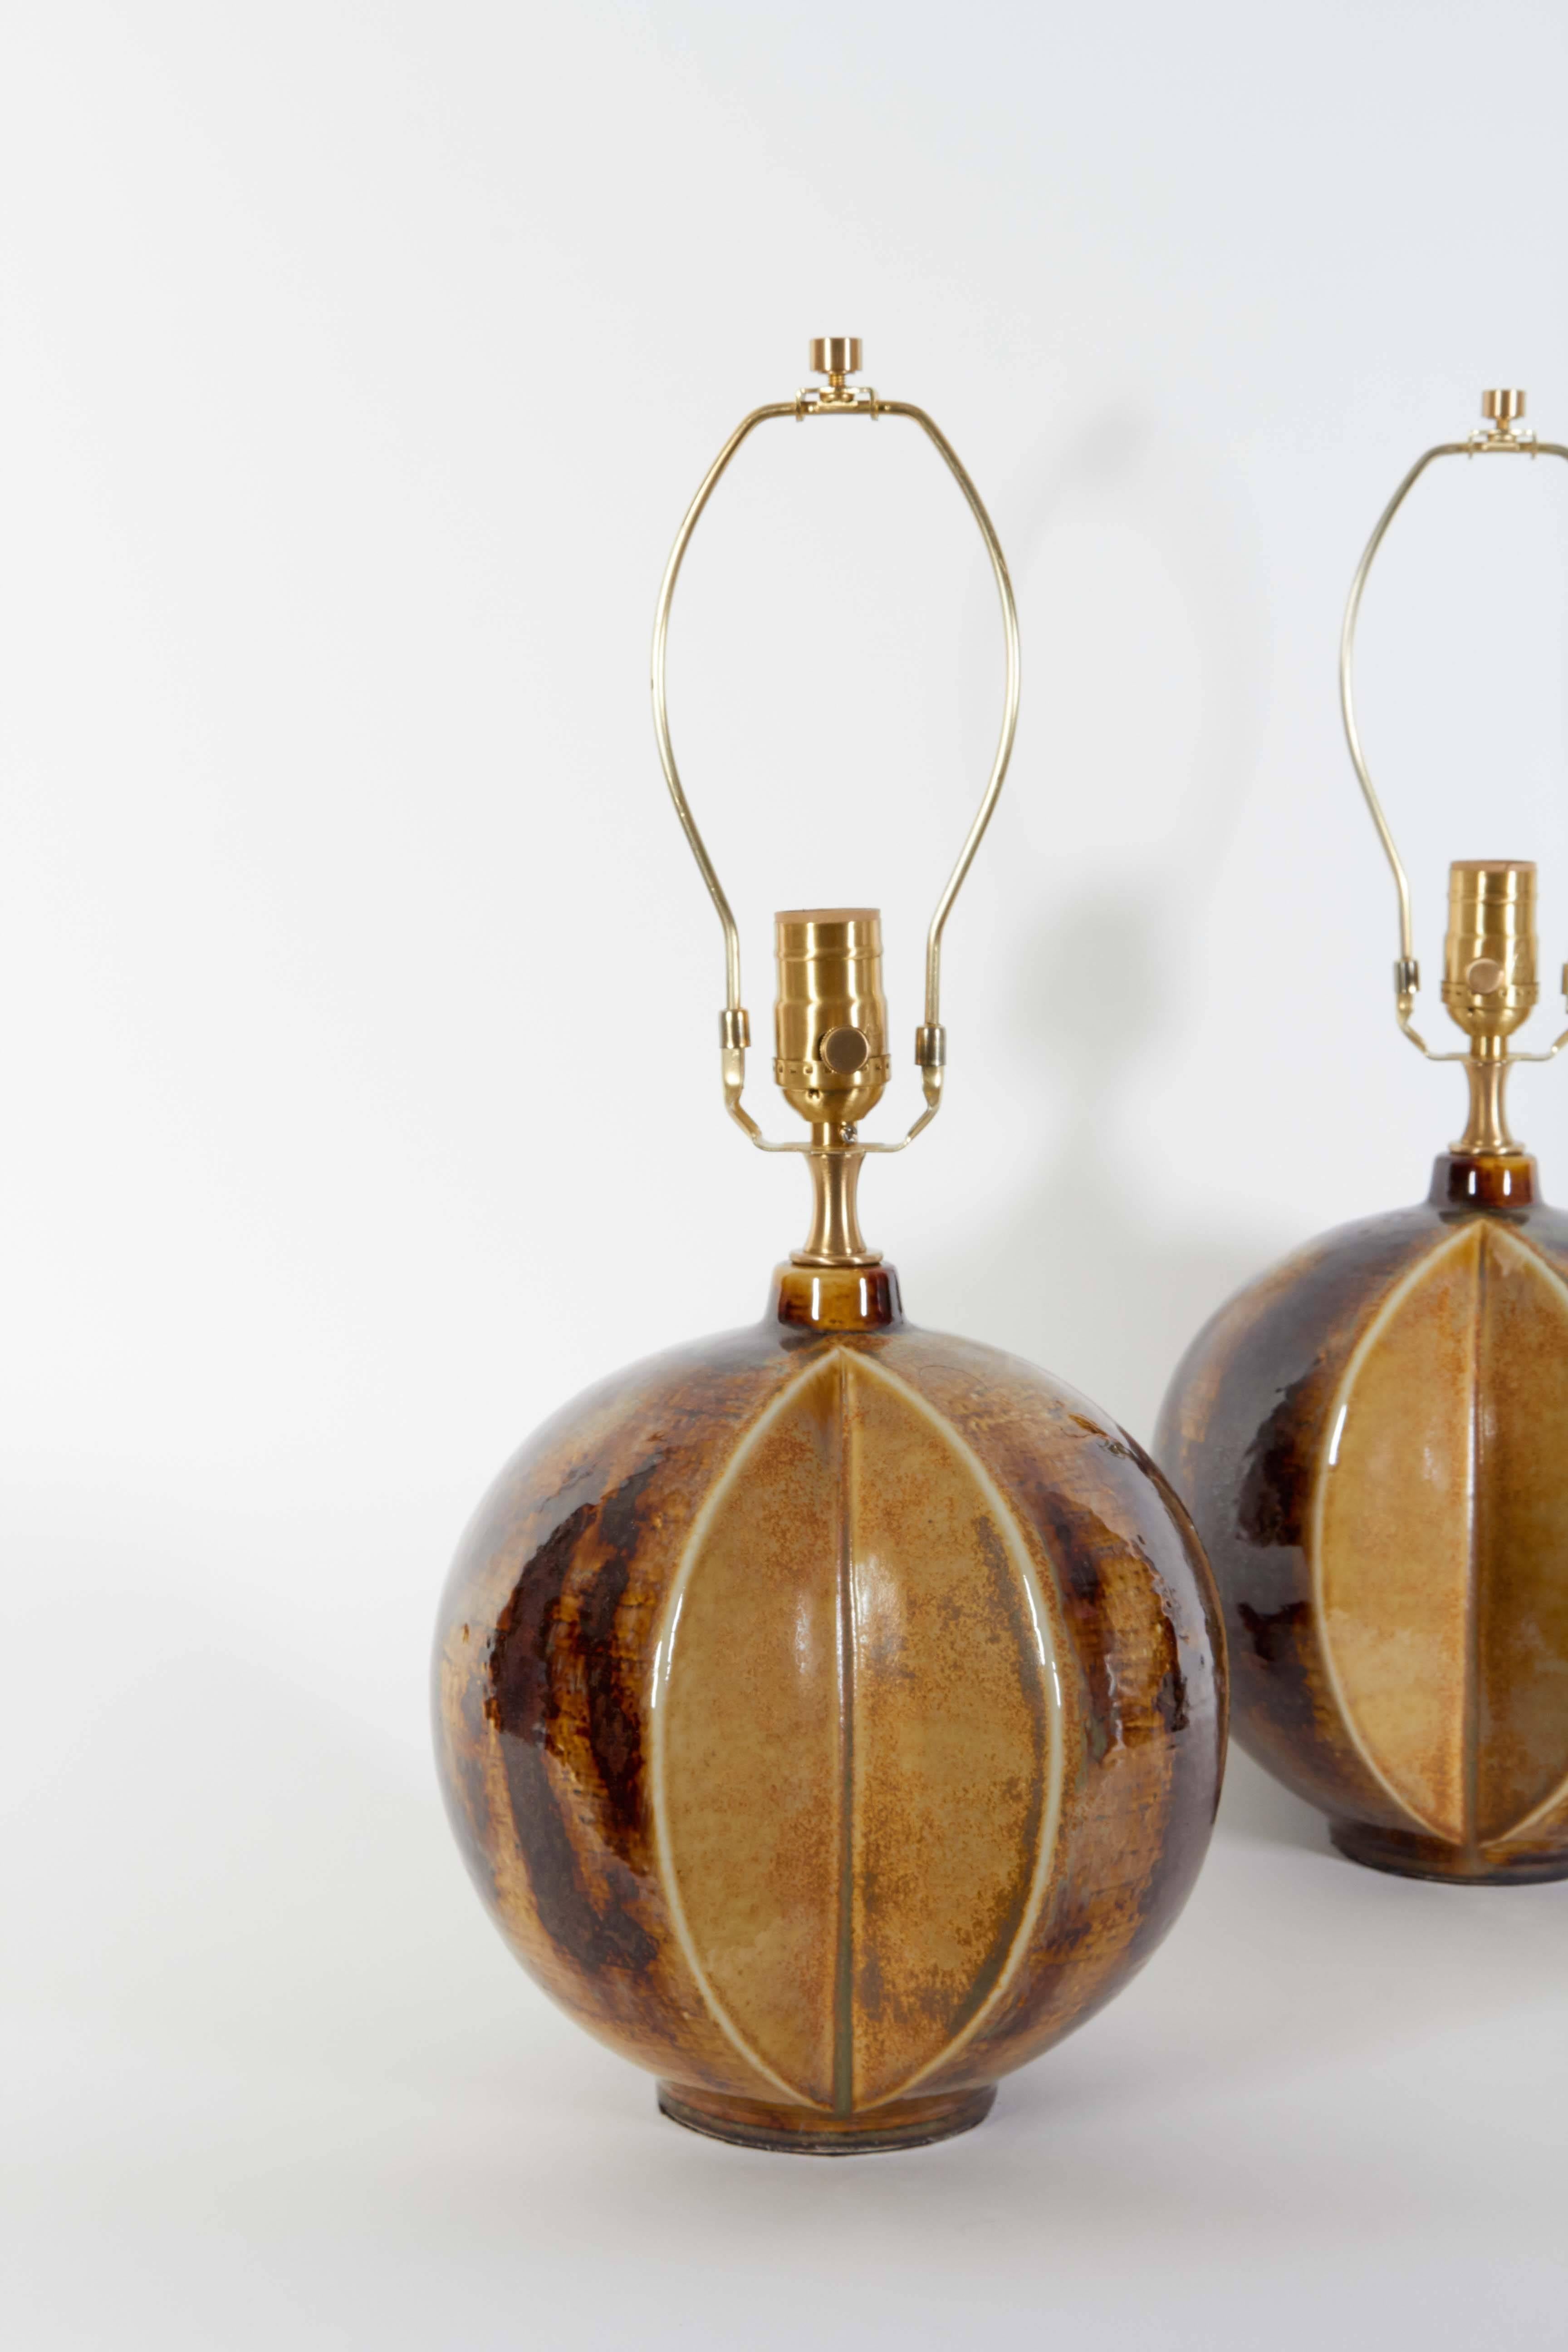 Unusual pair of Danish modern ceramic lamps with an abstract sectioned melon form and terrific brown and tan glaze. Retrofitted with satin brass hardware and new wiring for use in the USA.